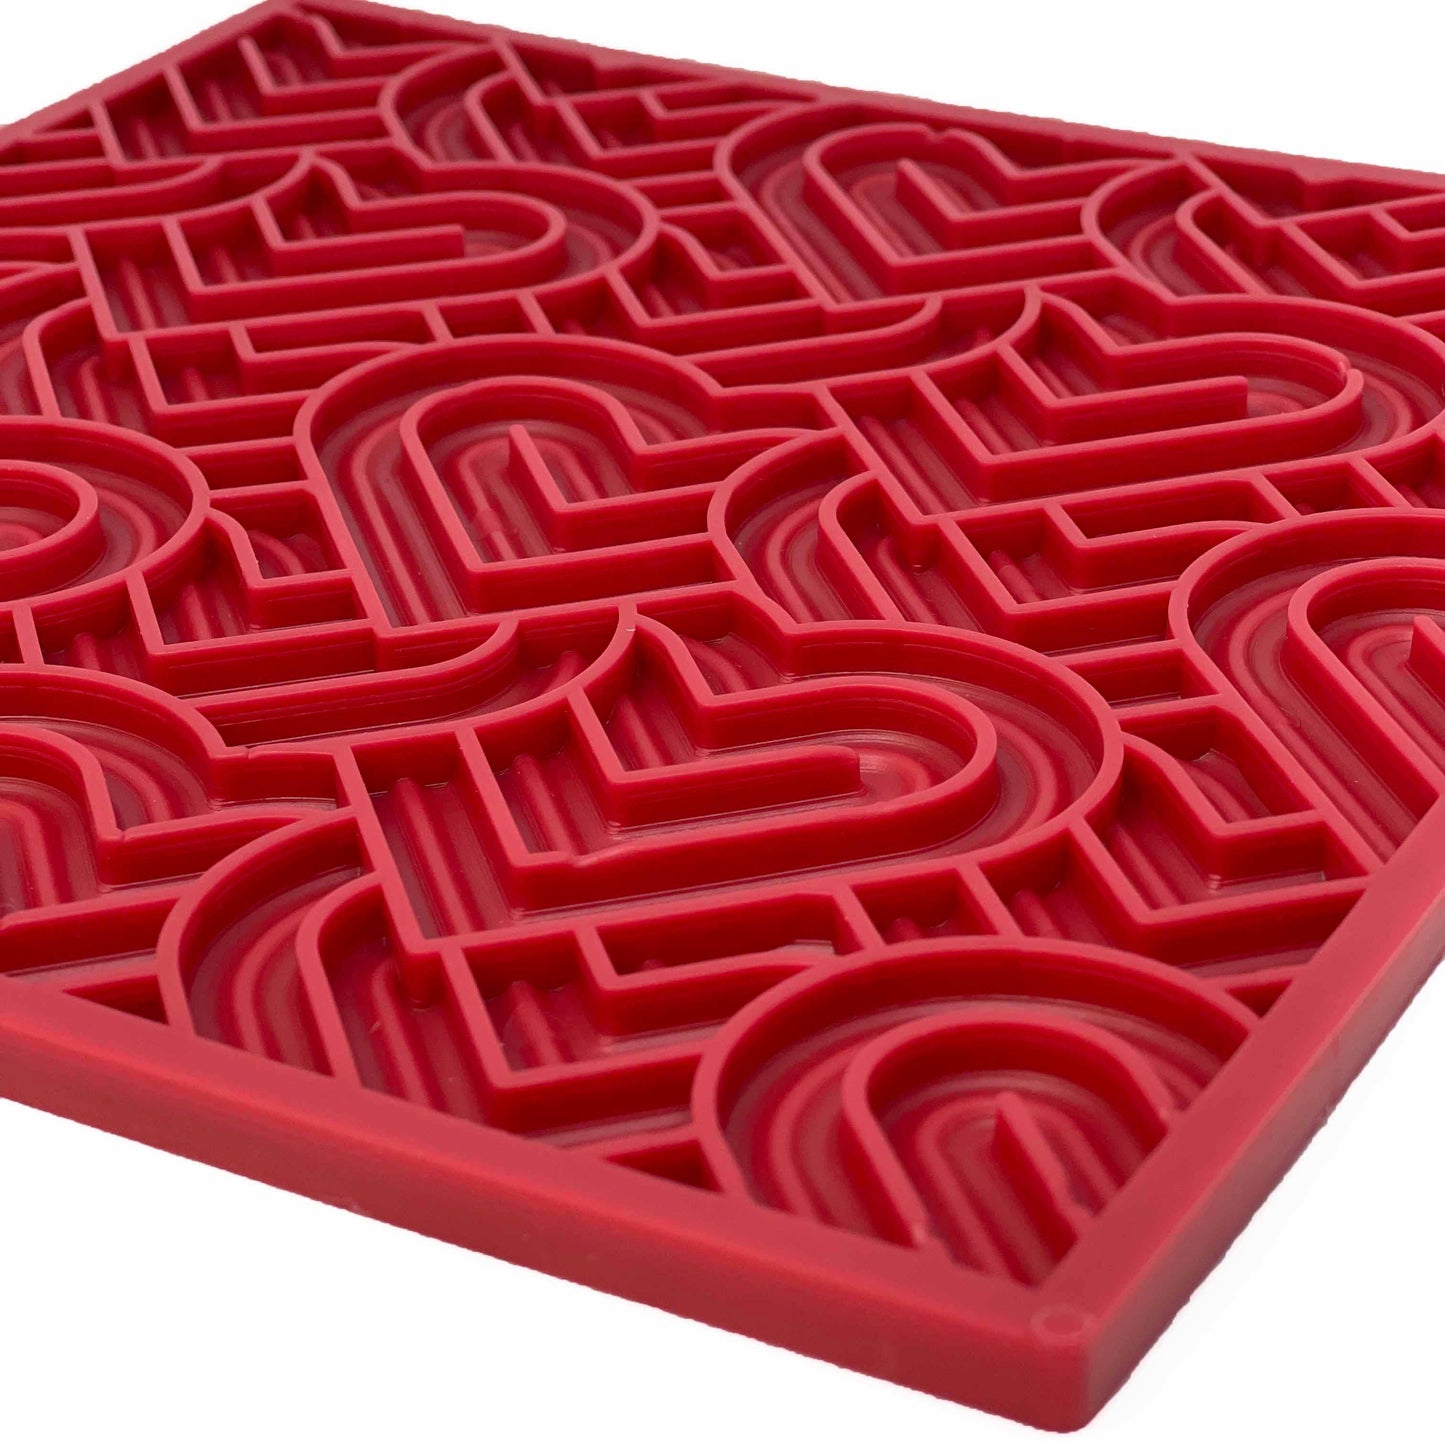 Heart Design "Love" Emat Enrichment Lick Mat - Red - Small: Large